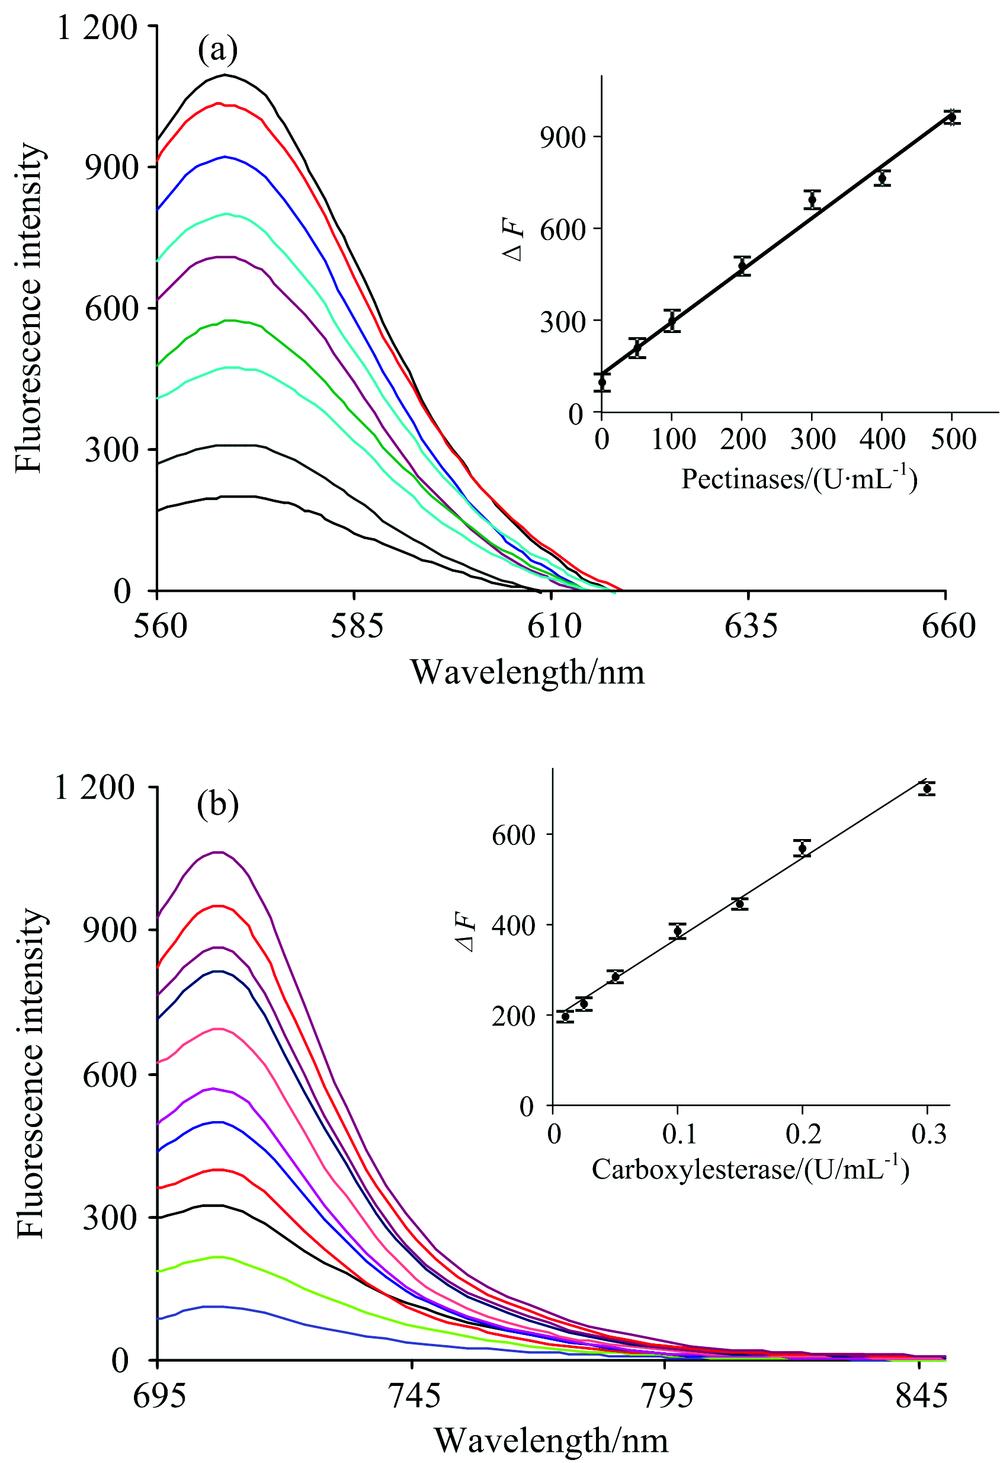 (a) Fluorescence spectra and linear fitting curve of pectinases at different concentrations; (b) Fluorescence spectra of probe (10 μmol·L-1) reacting with carboxylesterase at different concentrations